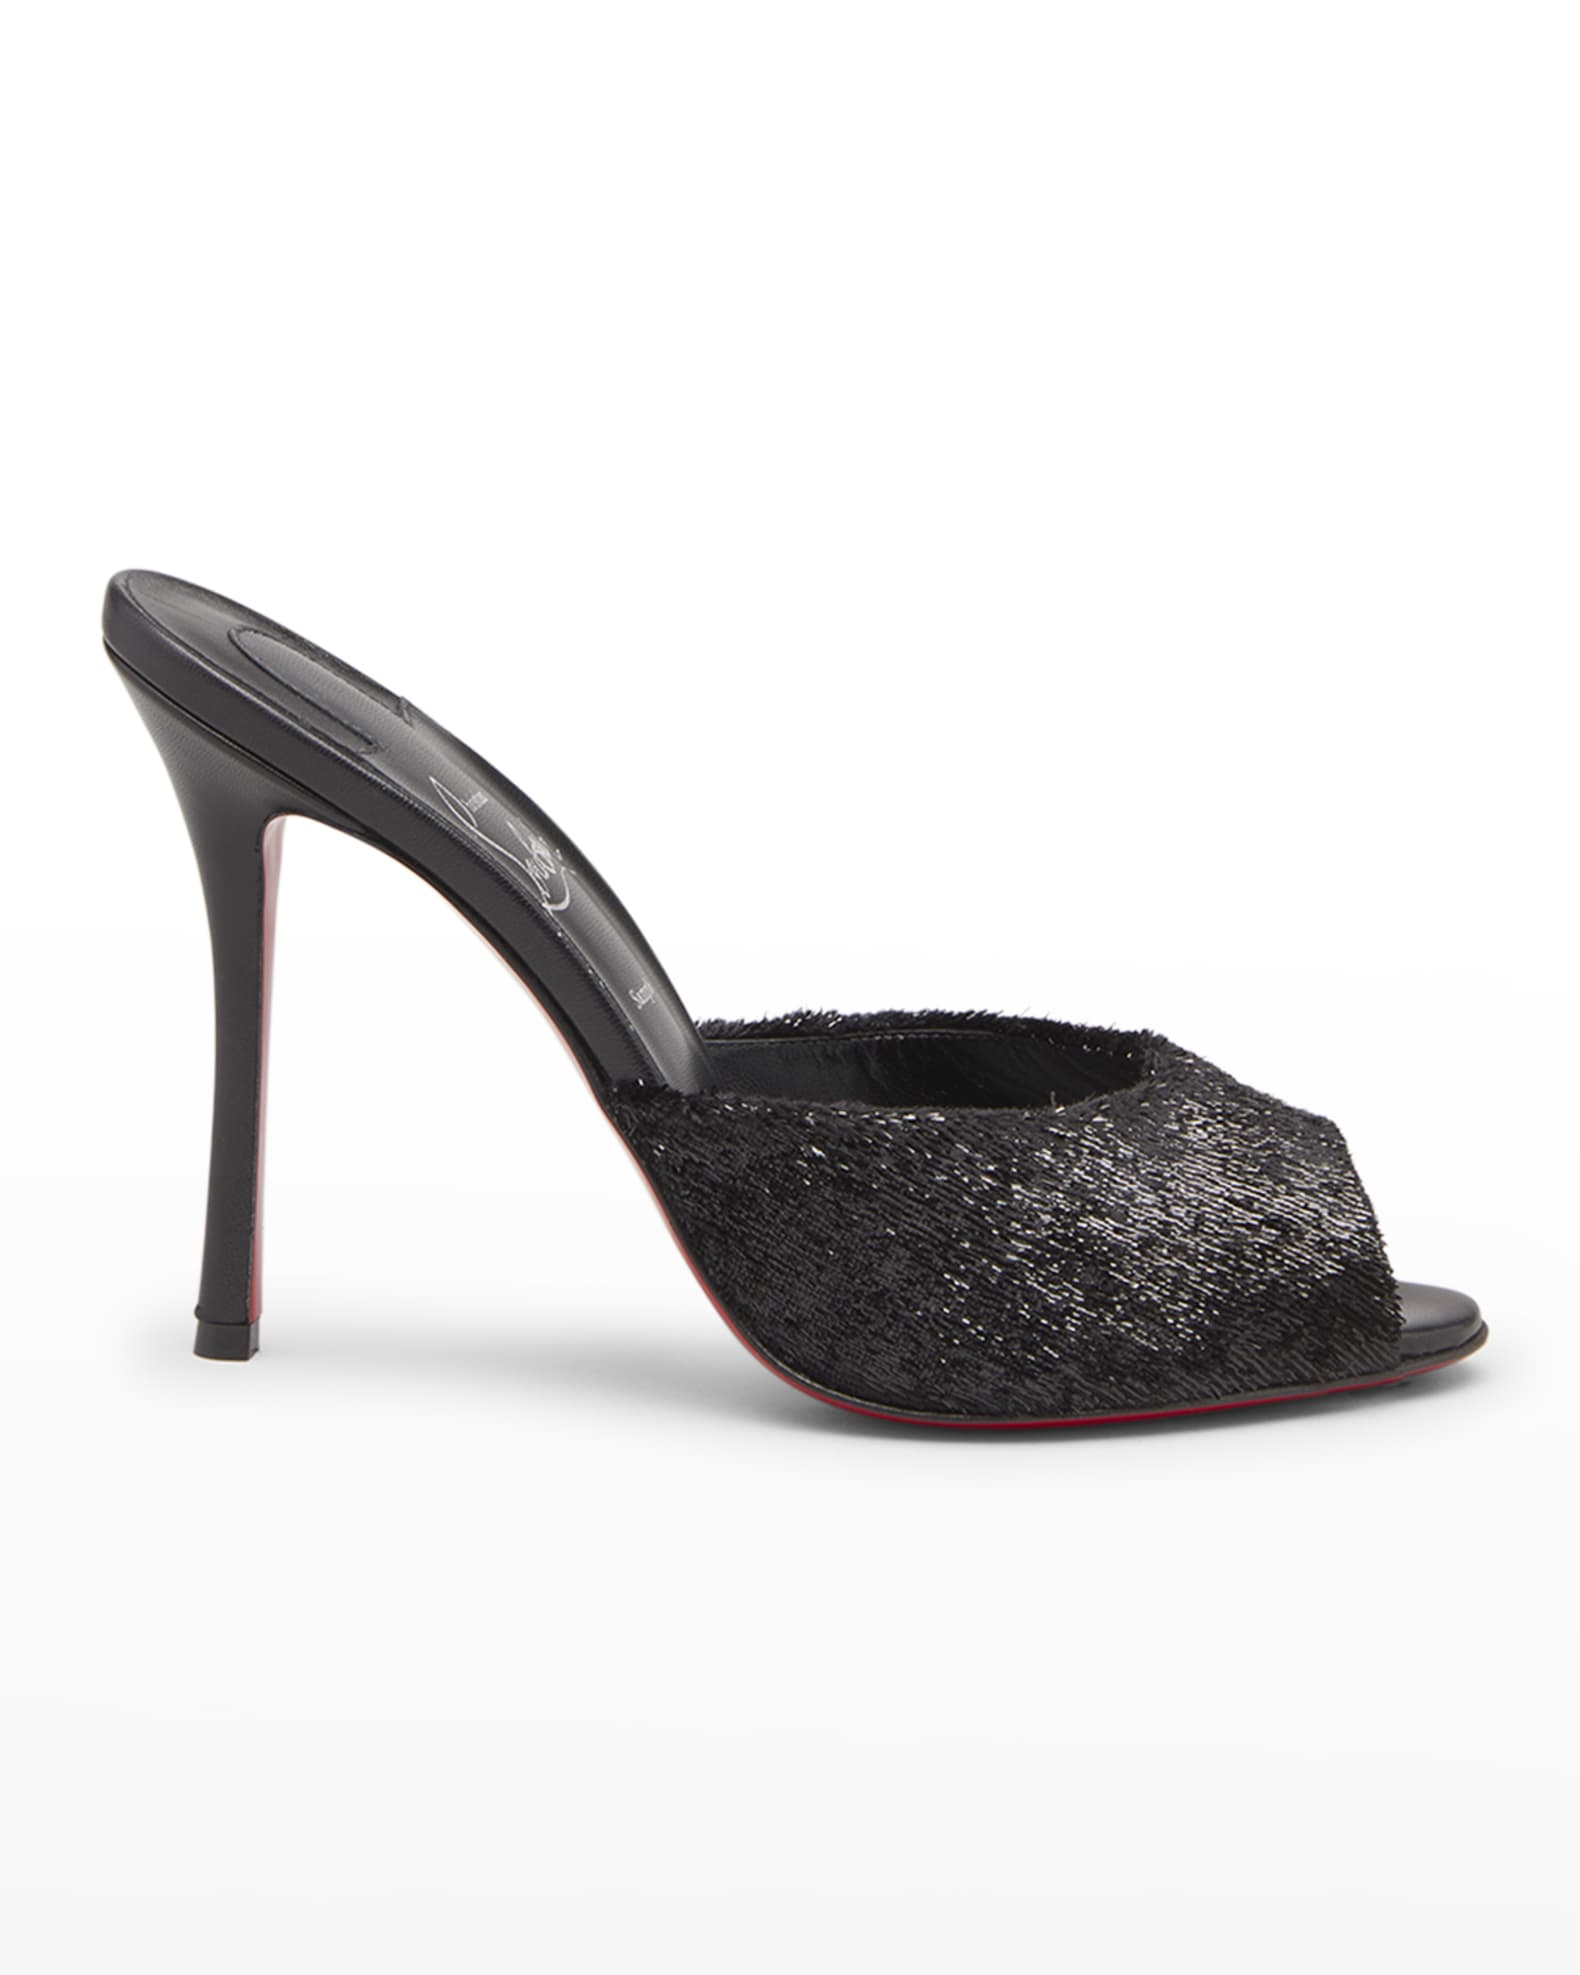 Christian Louboutin Me Dolly Red Sole Mule Sandals | Neiman Marcus